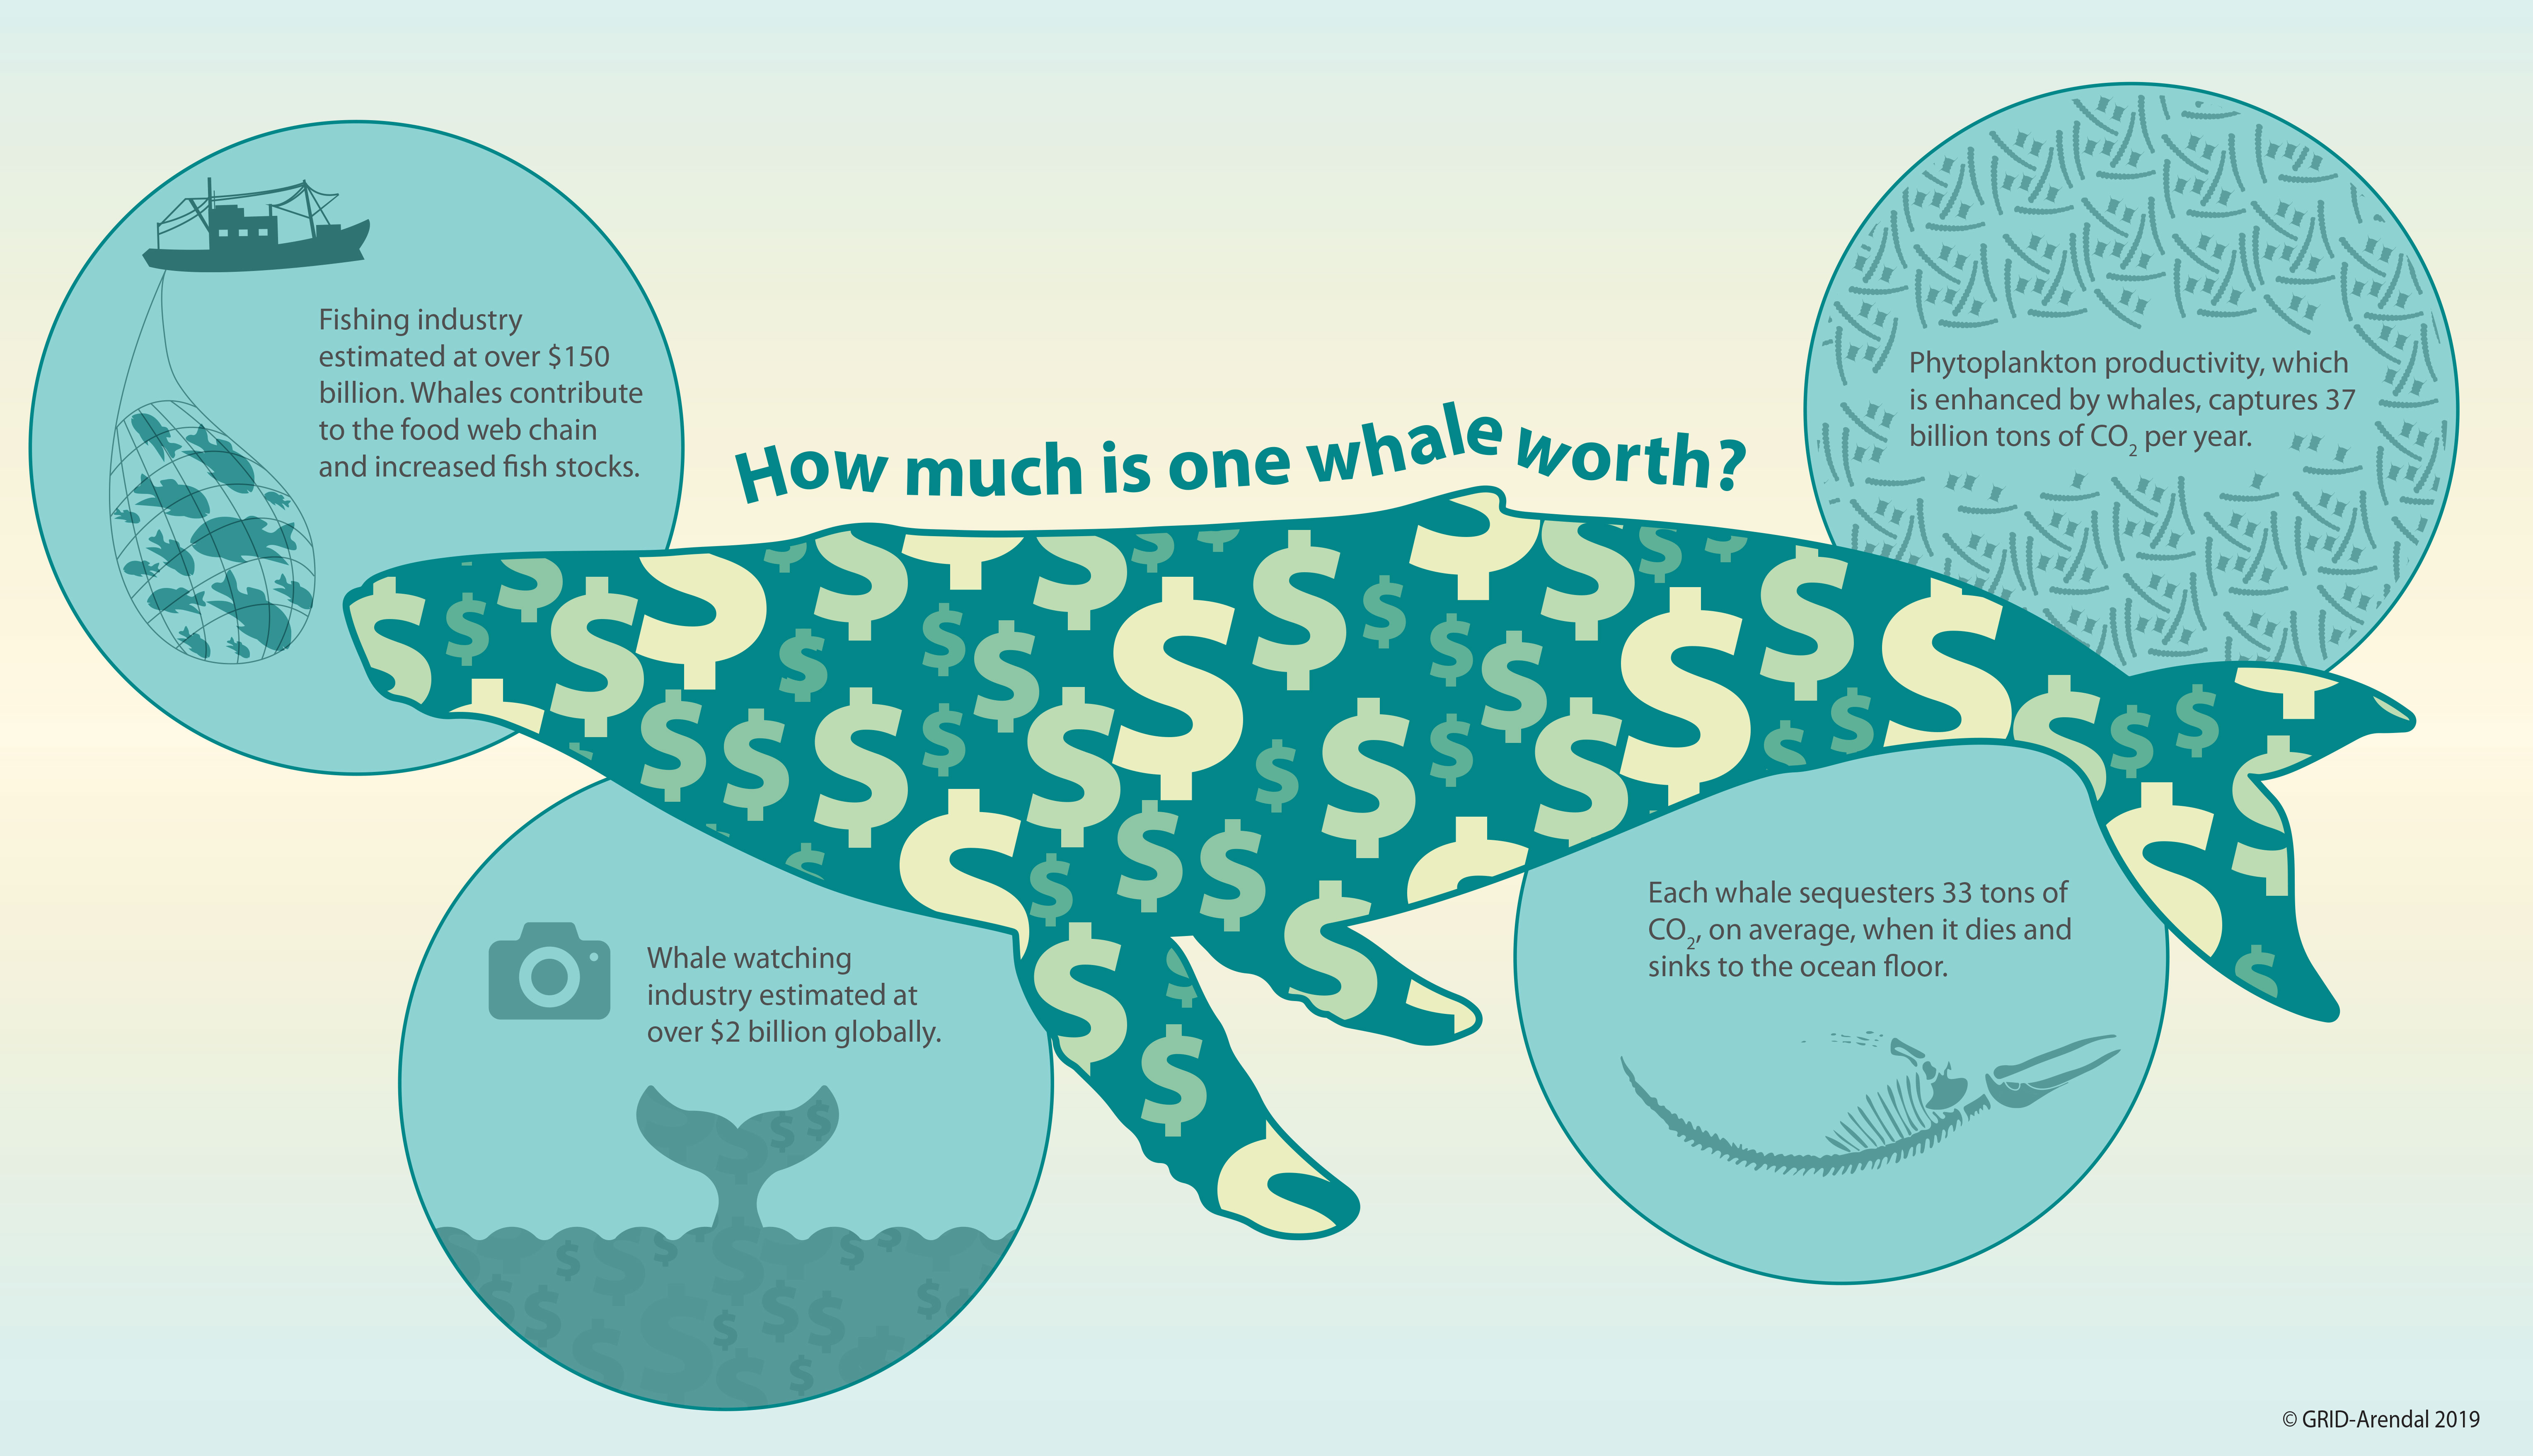 IMF conservative estimates put the value of the average great whale, based on its various activities, at more than $2 million.